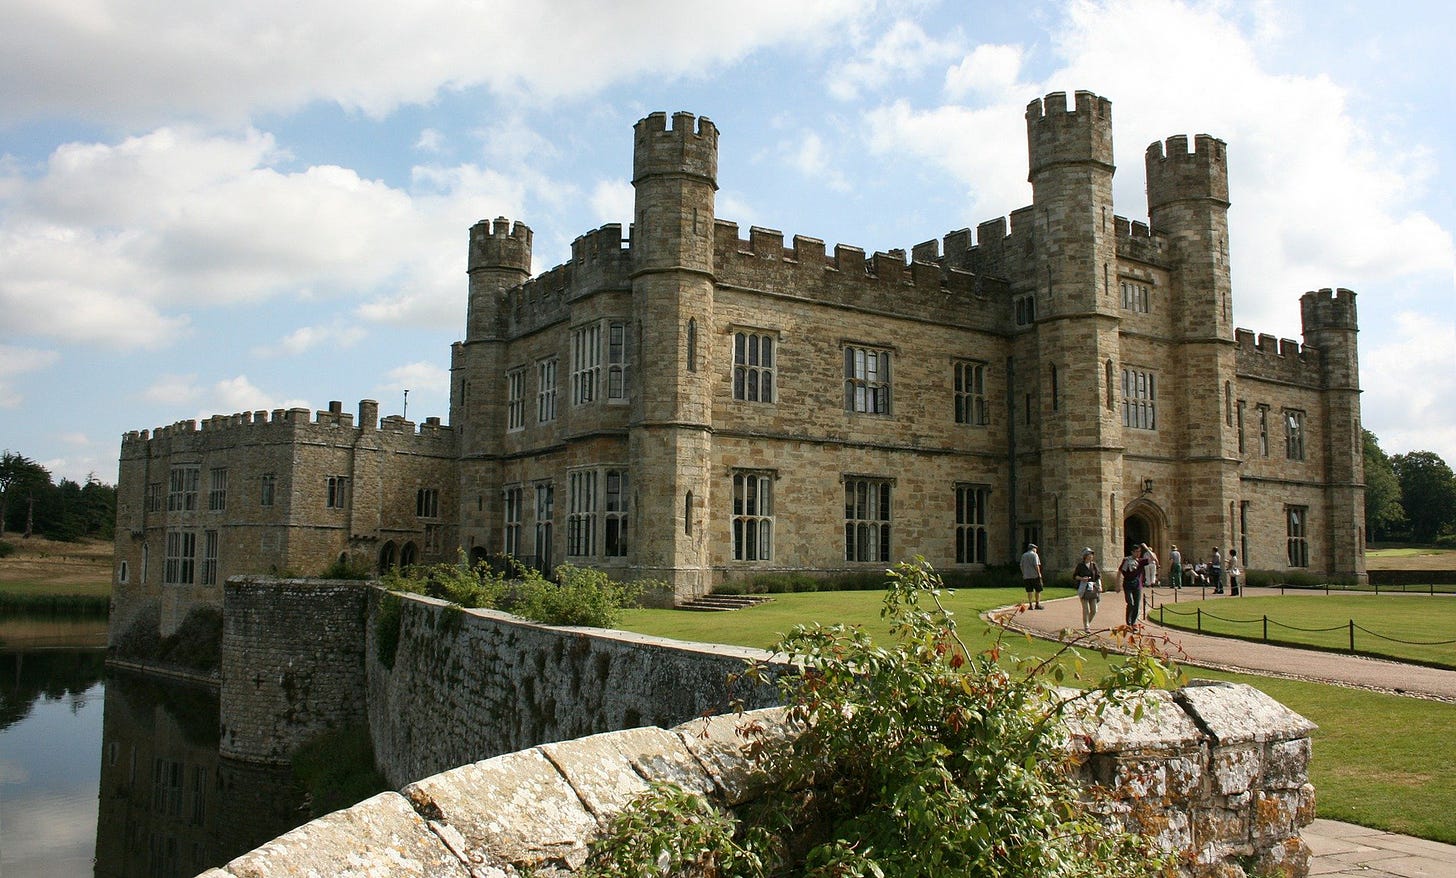 The ‘New Castle’, built 1820–23 to match the 13th century Gloriette behind left.